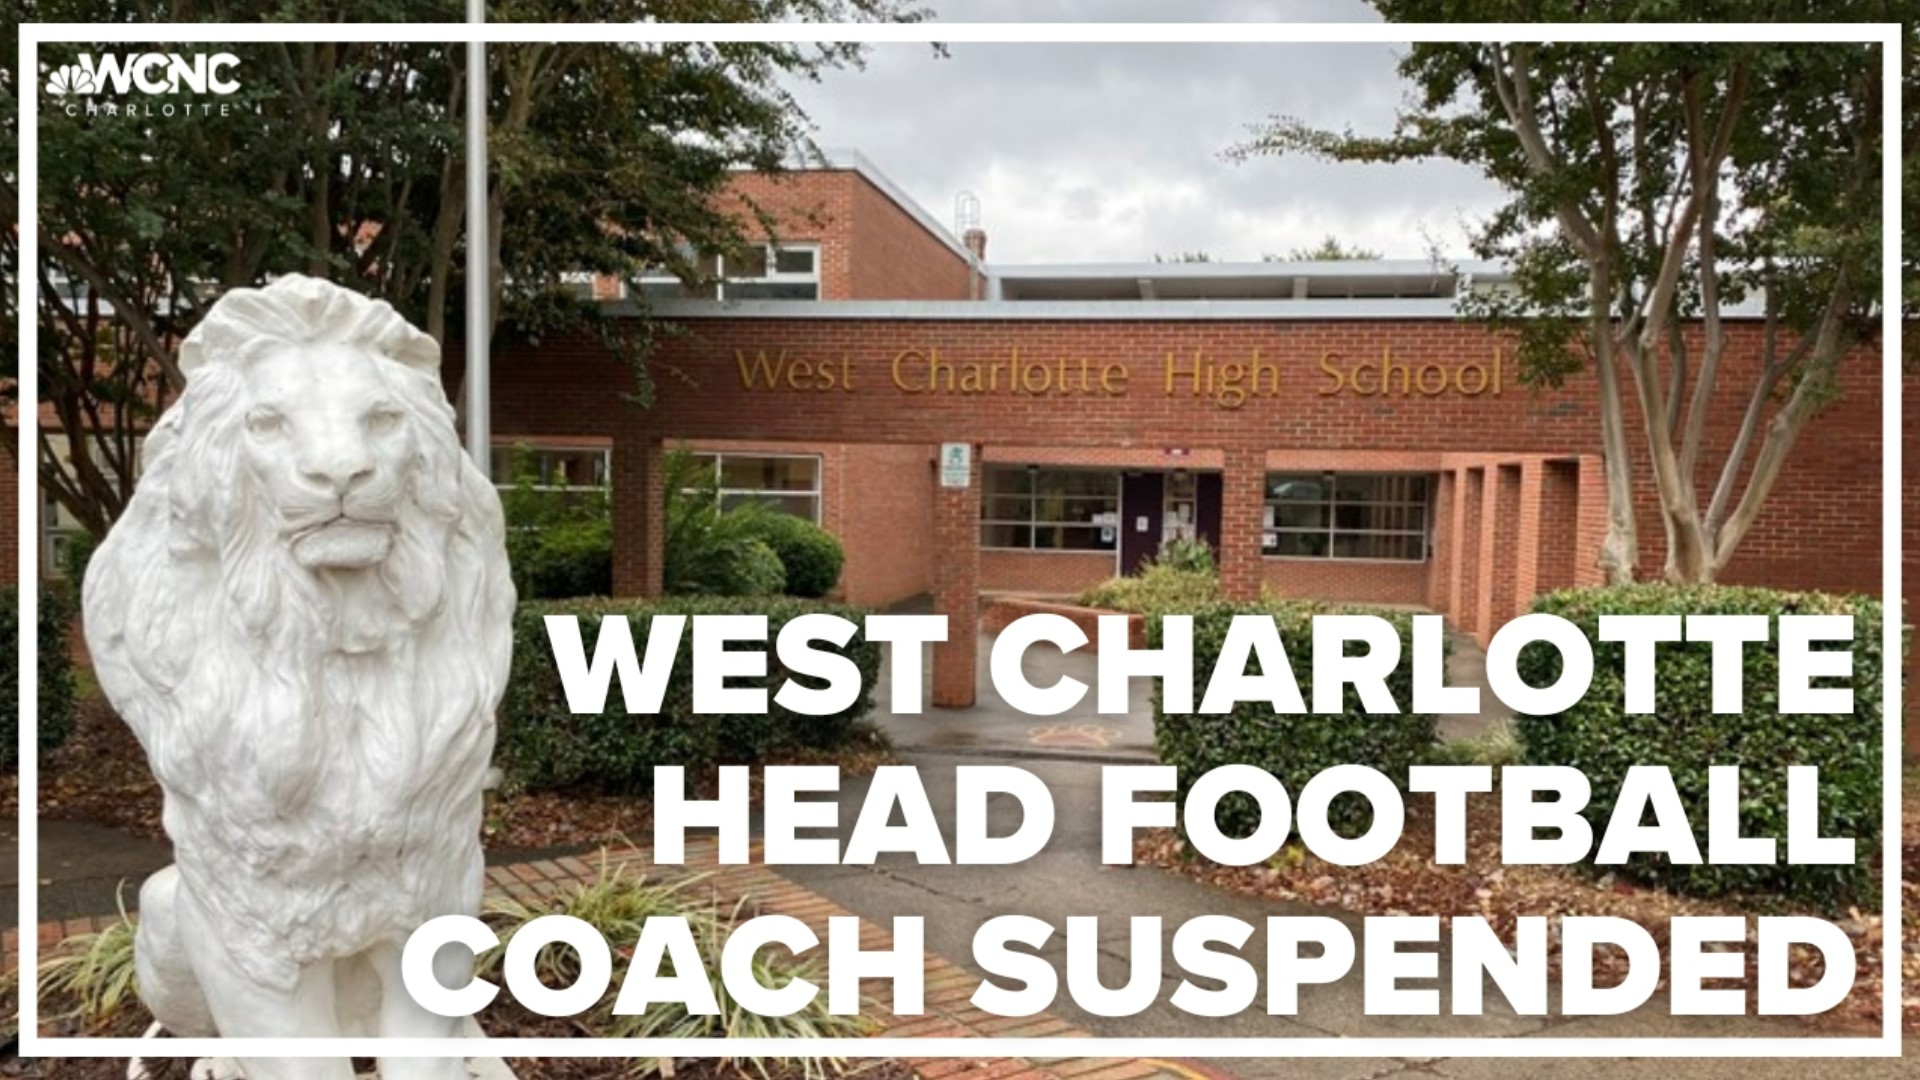 One West high school graduate says he is disappointed to hear about the coach